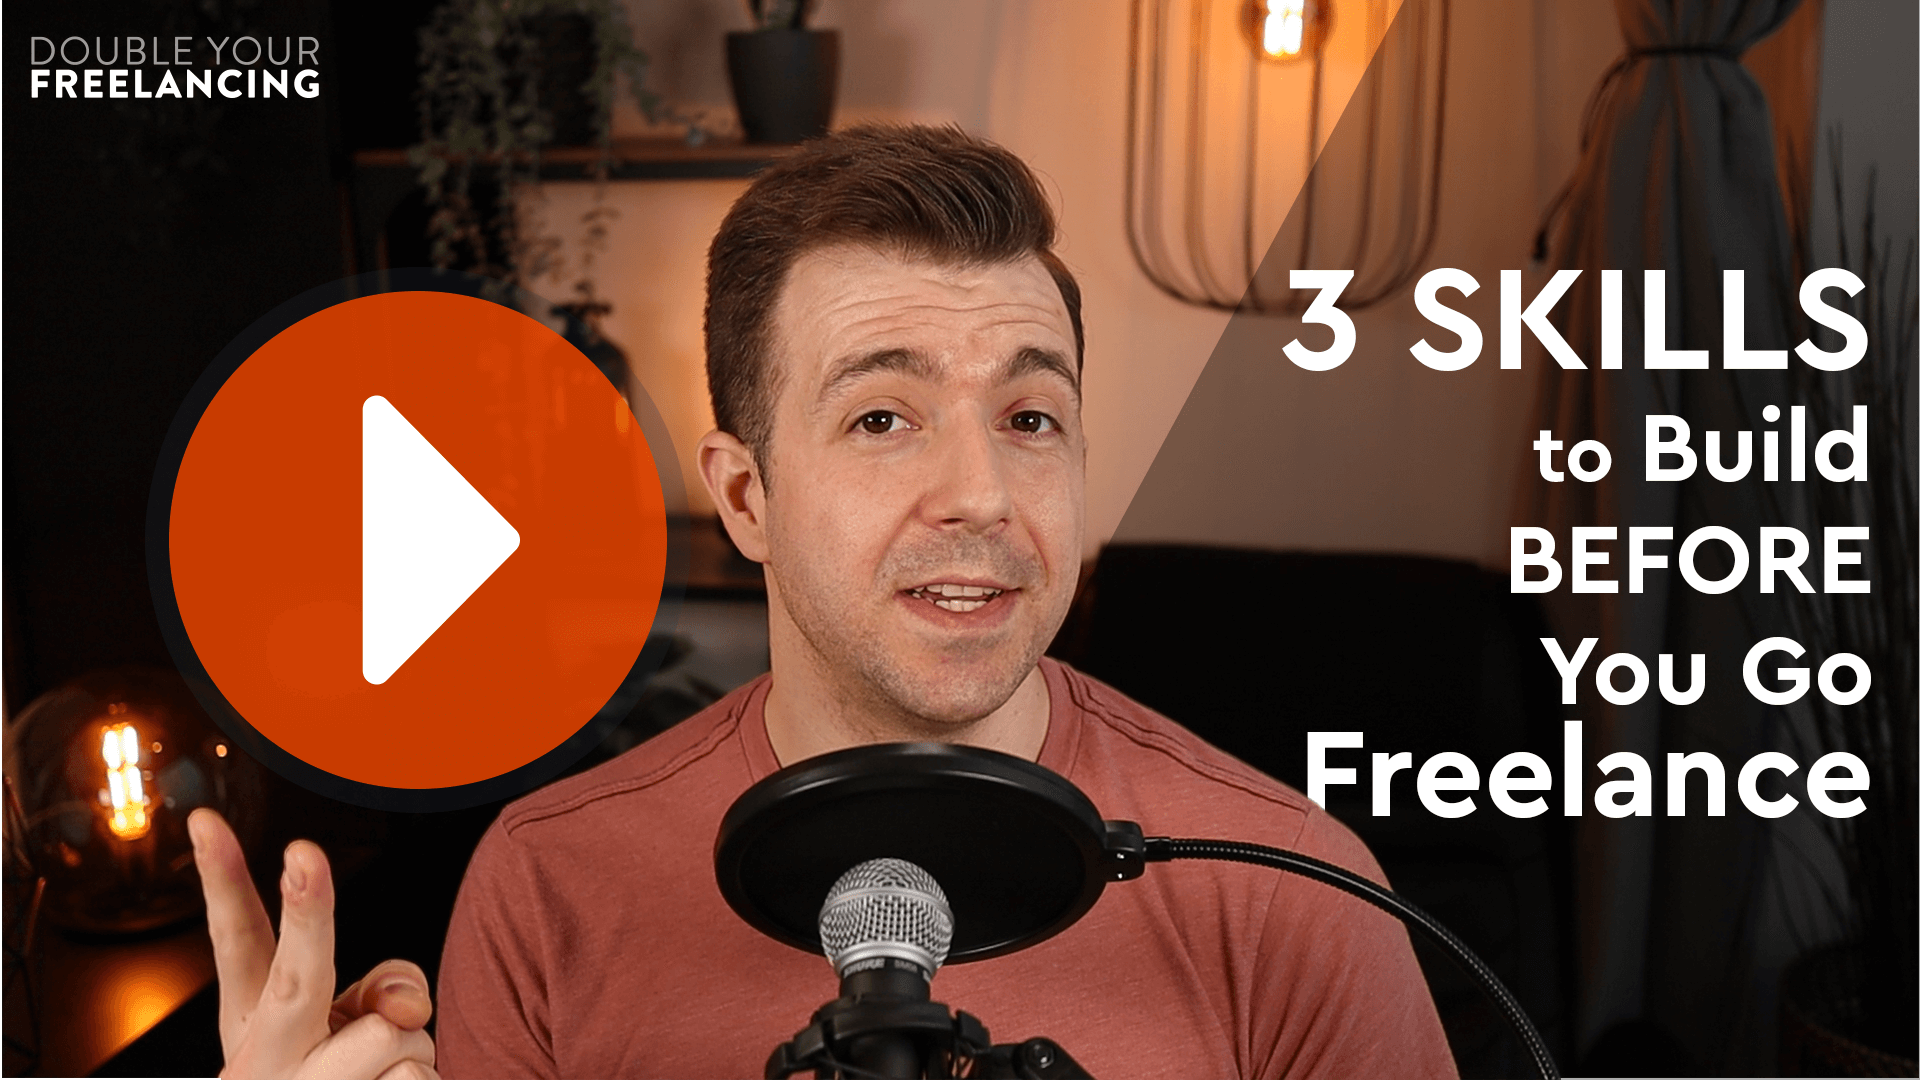 [Video] 3 Skills to Build Before You Go Freelance